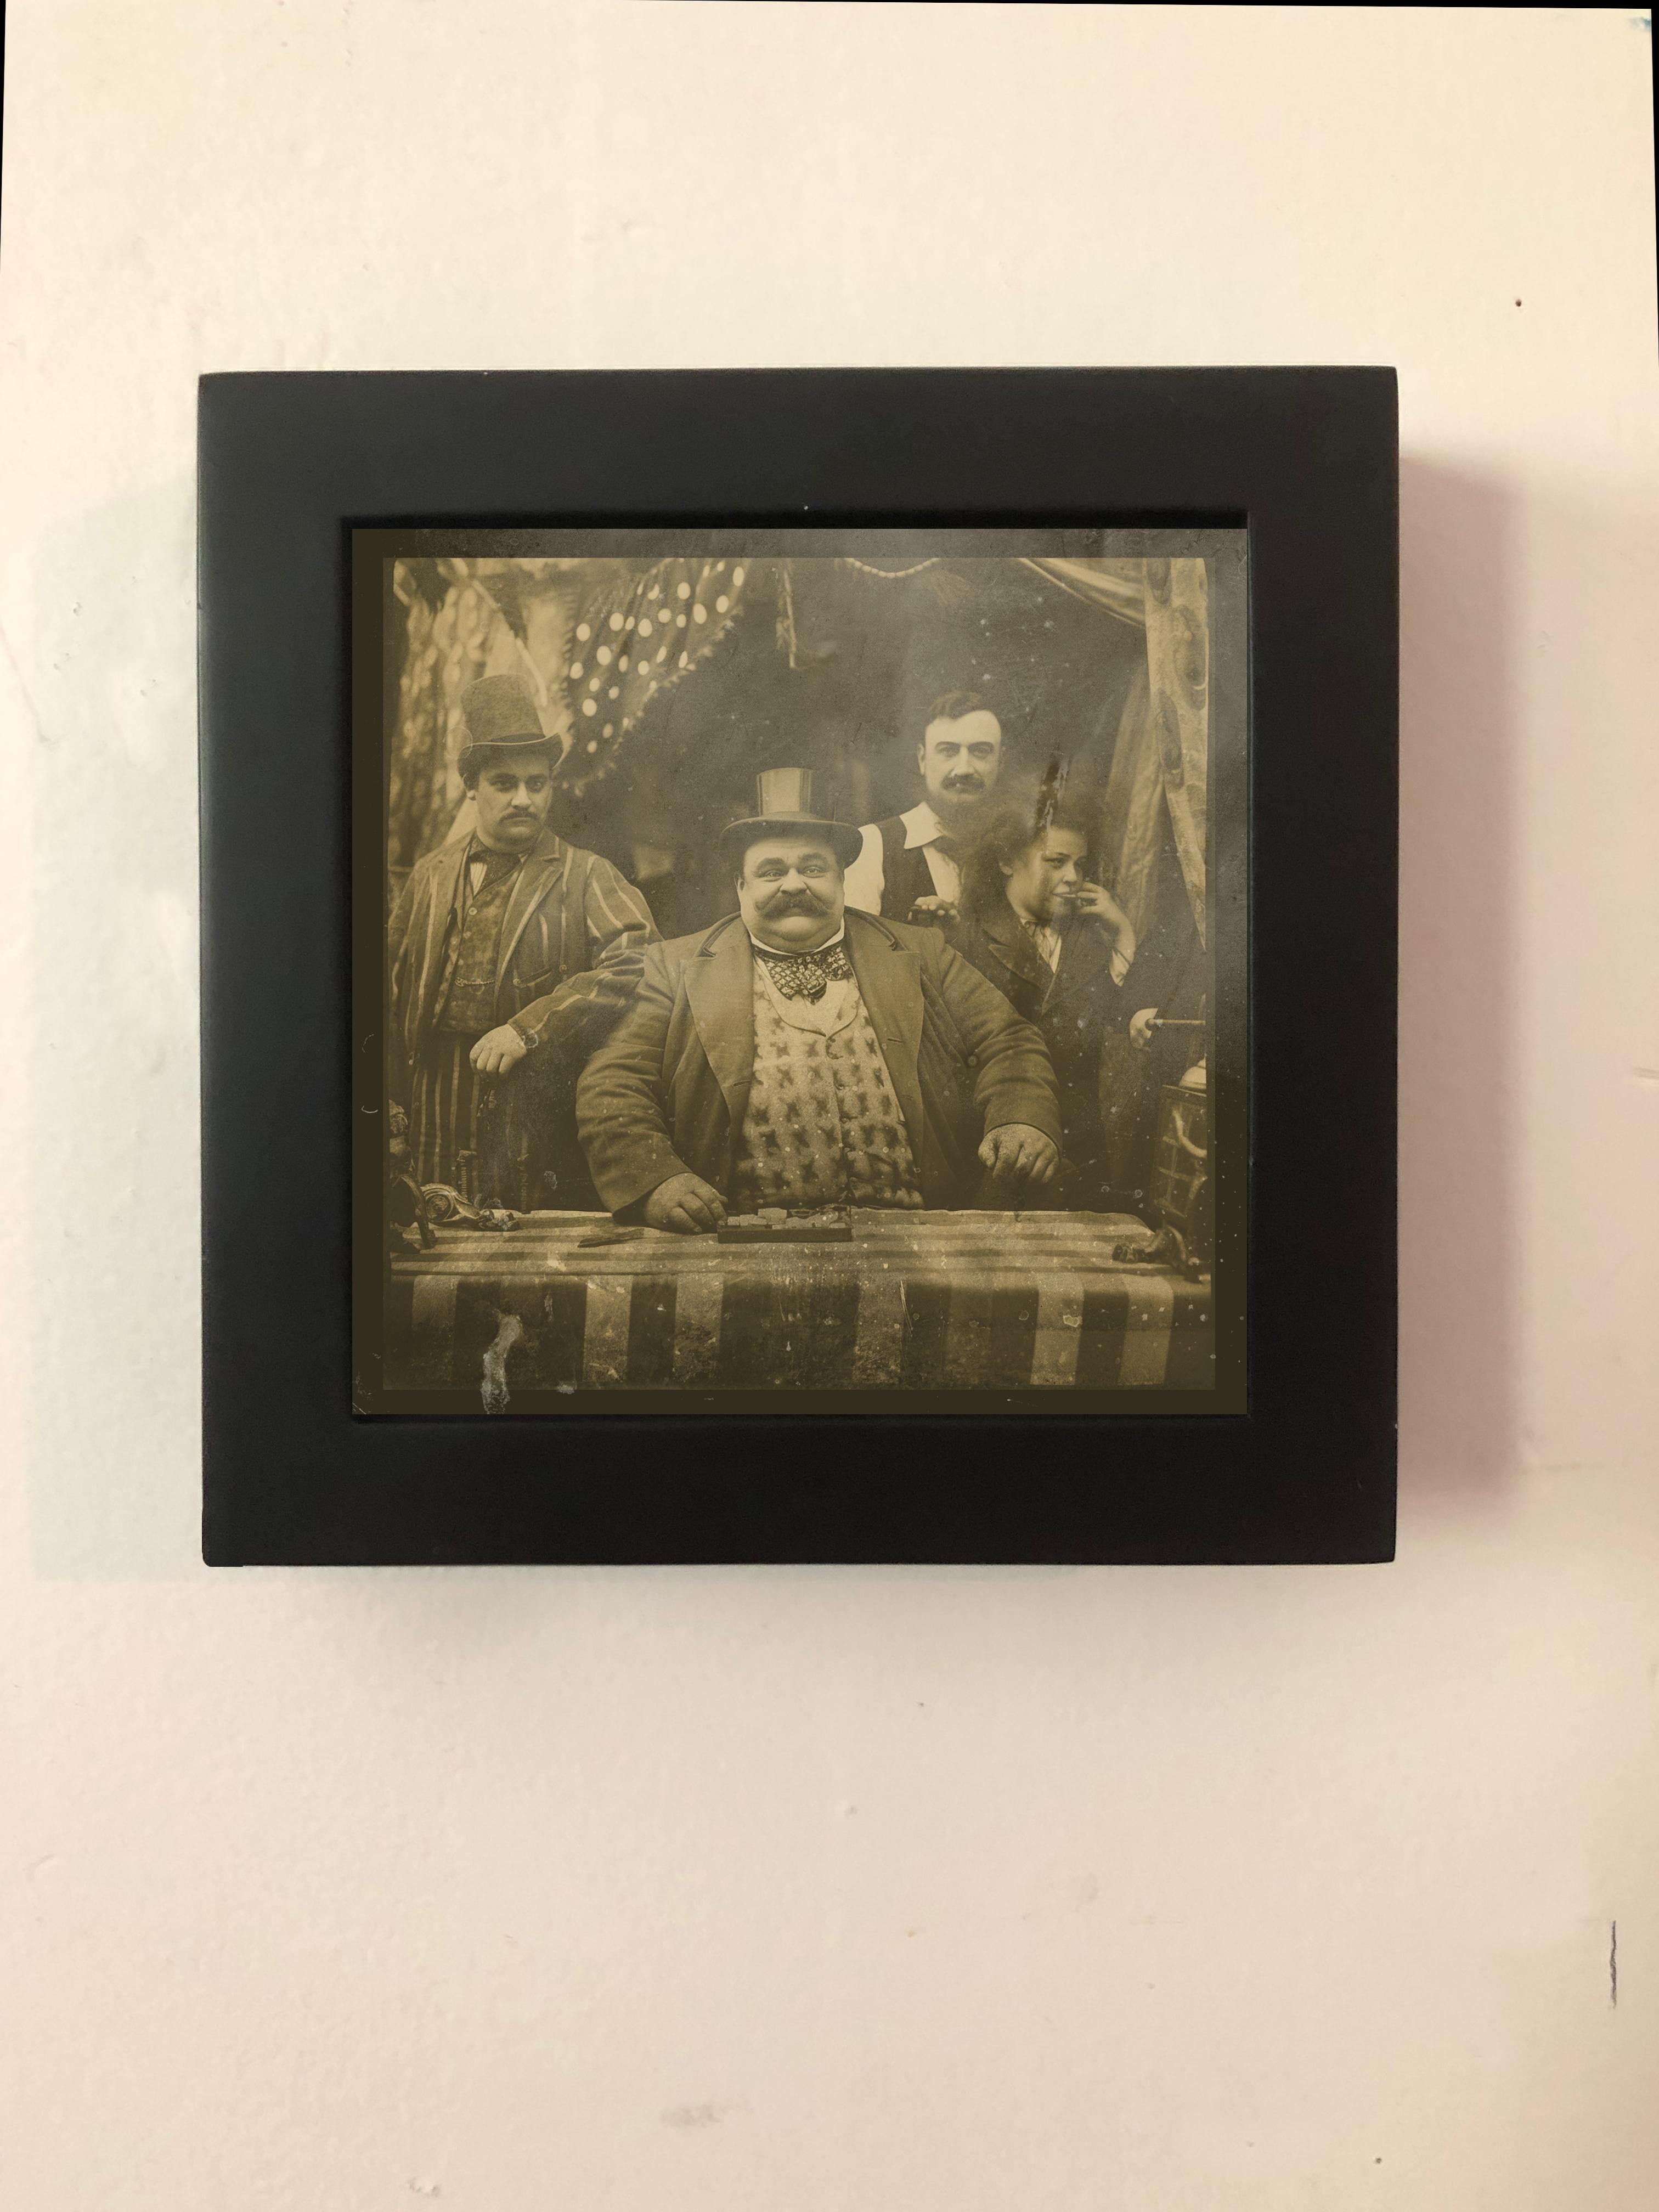 Game of Chance - Circus Series,  daguerreotype reproduction - Photograph by FPA Francis Pavy Artist